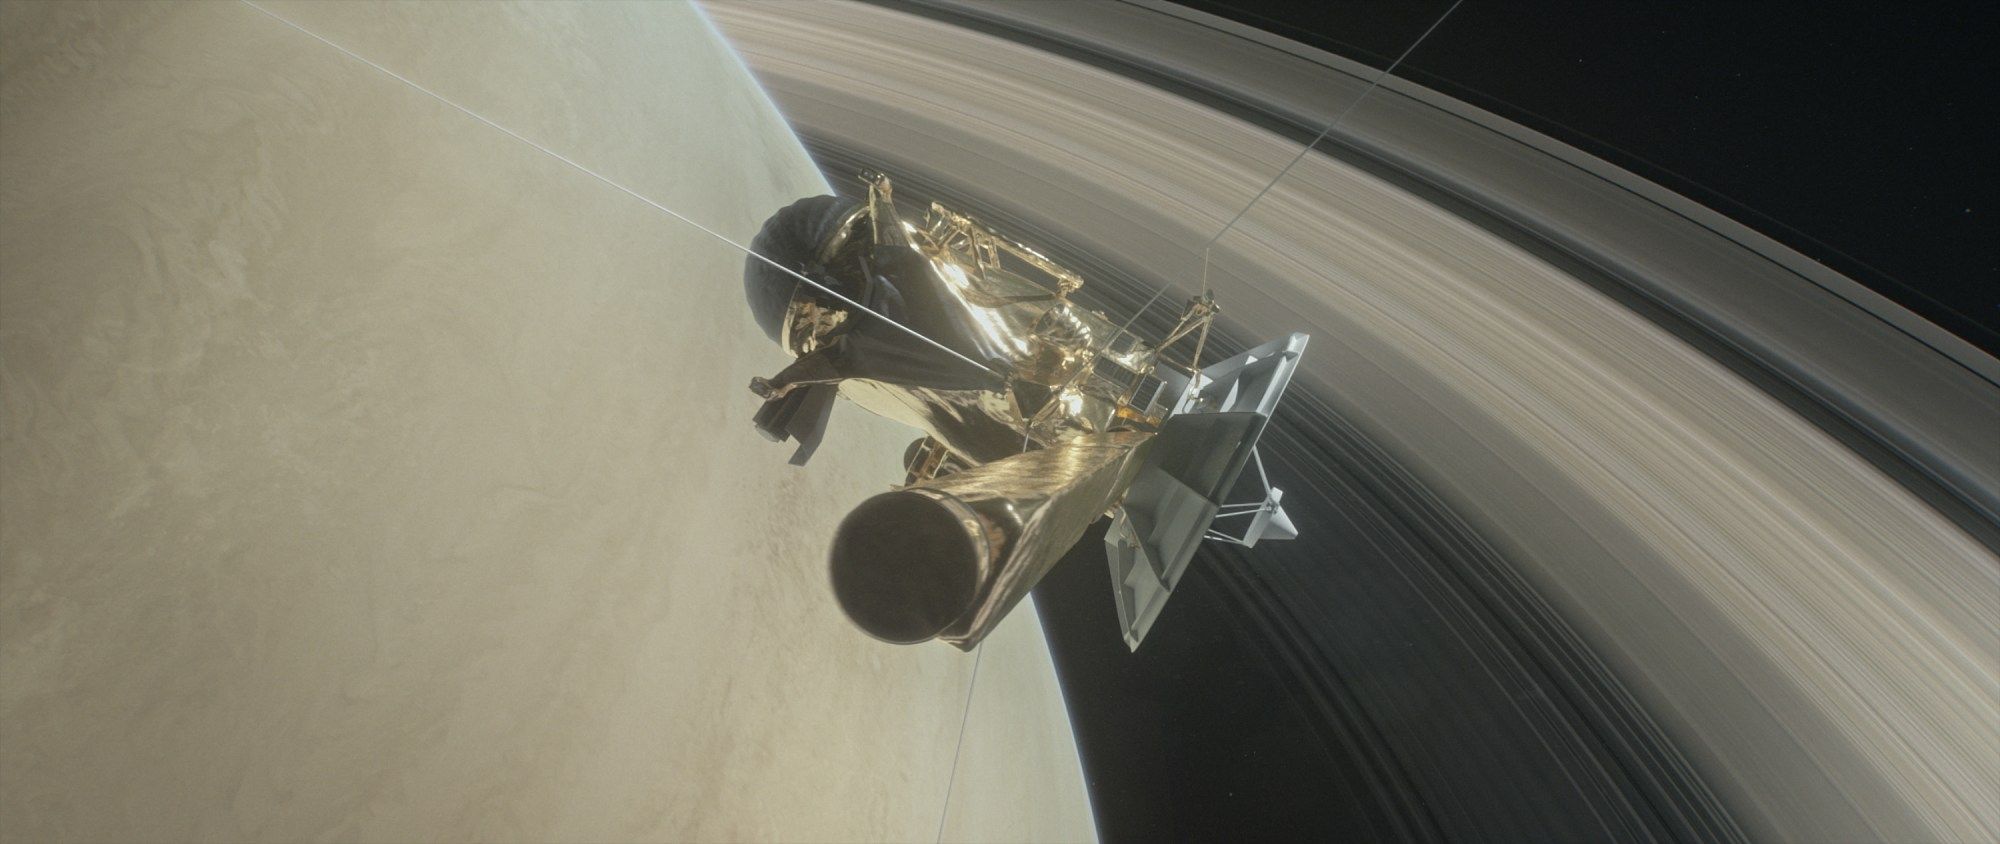 Illustration of Cassini diving between the rings of Saturn.